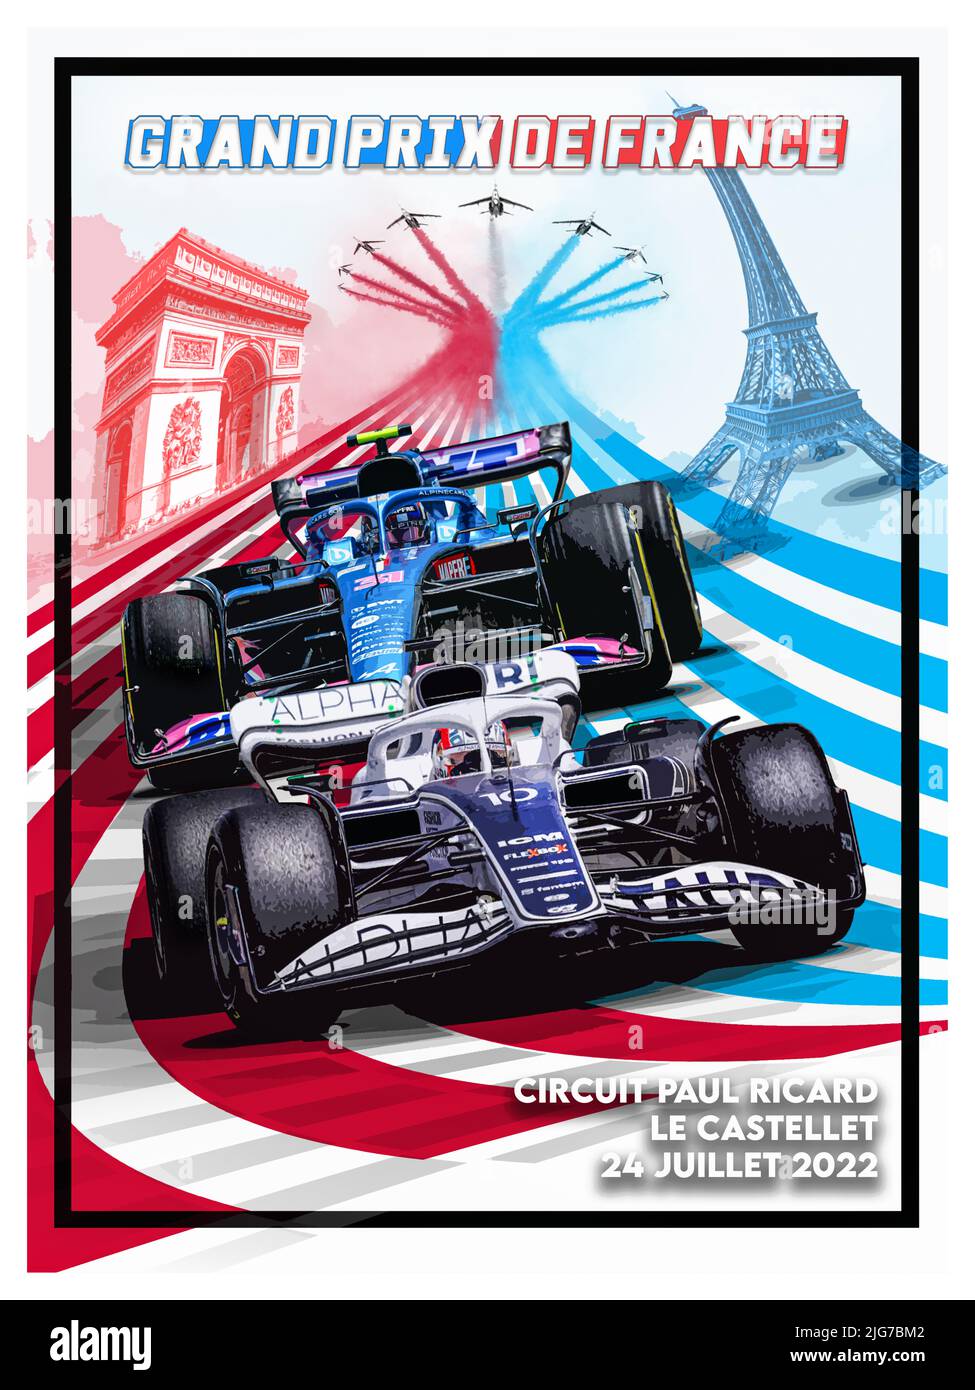 French F1 Grand Prix Race Poster Stock Photo